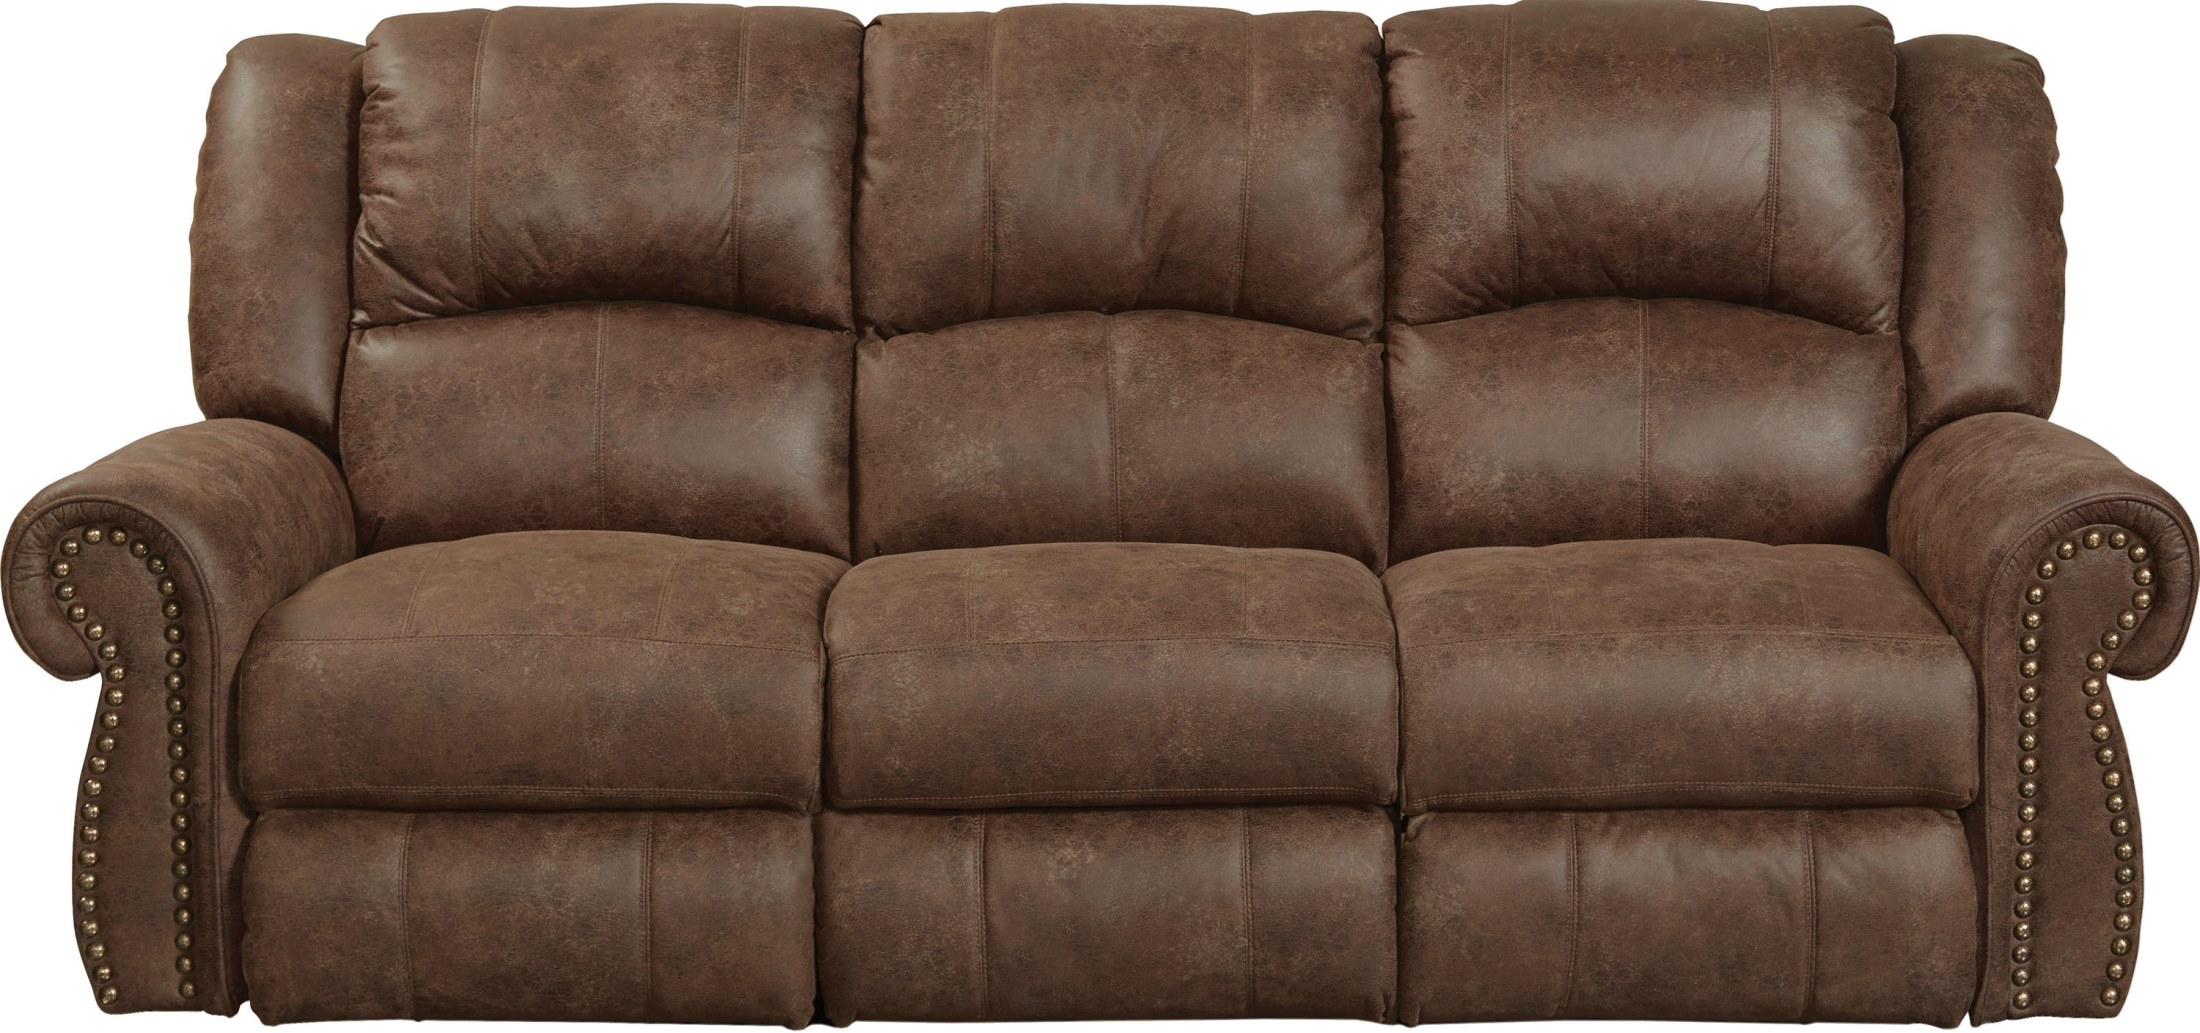 westin power reclining sofa brown leather